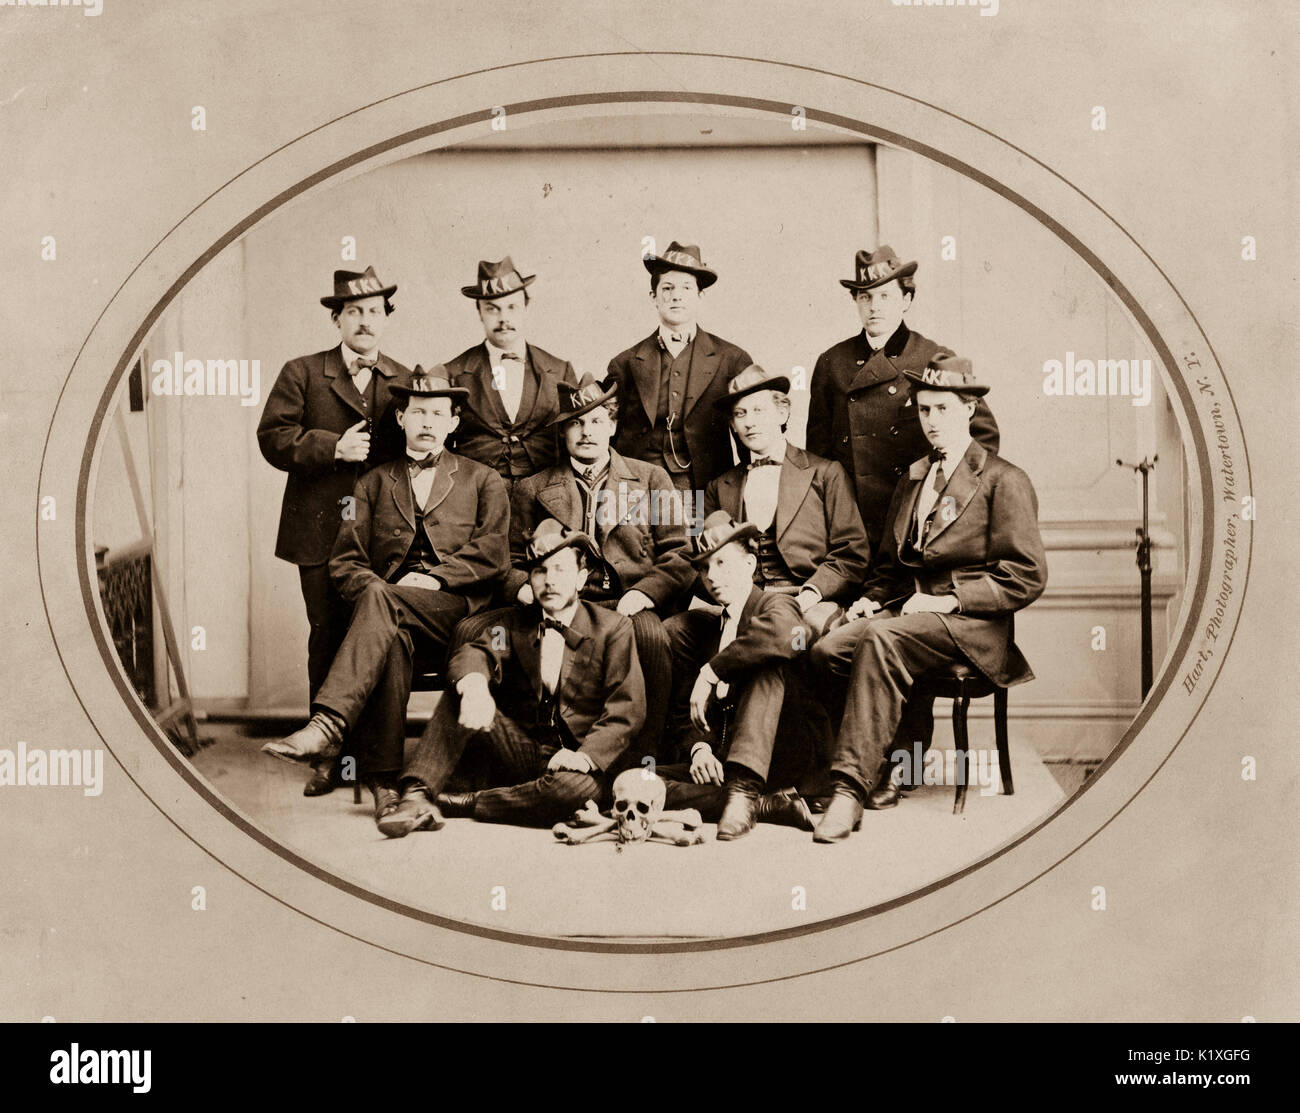 Ku Klux Klan, Watertown Division 289 / Hart, photographer, Watertown, N.Y. Photograph shows ten men posed seated and standing, wearing hats with 'KKK' in large letters, and with a skull and bones arranged on the floor in front of them. Stock Photo